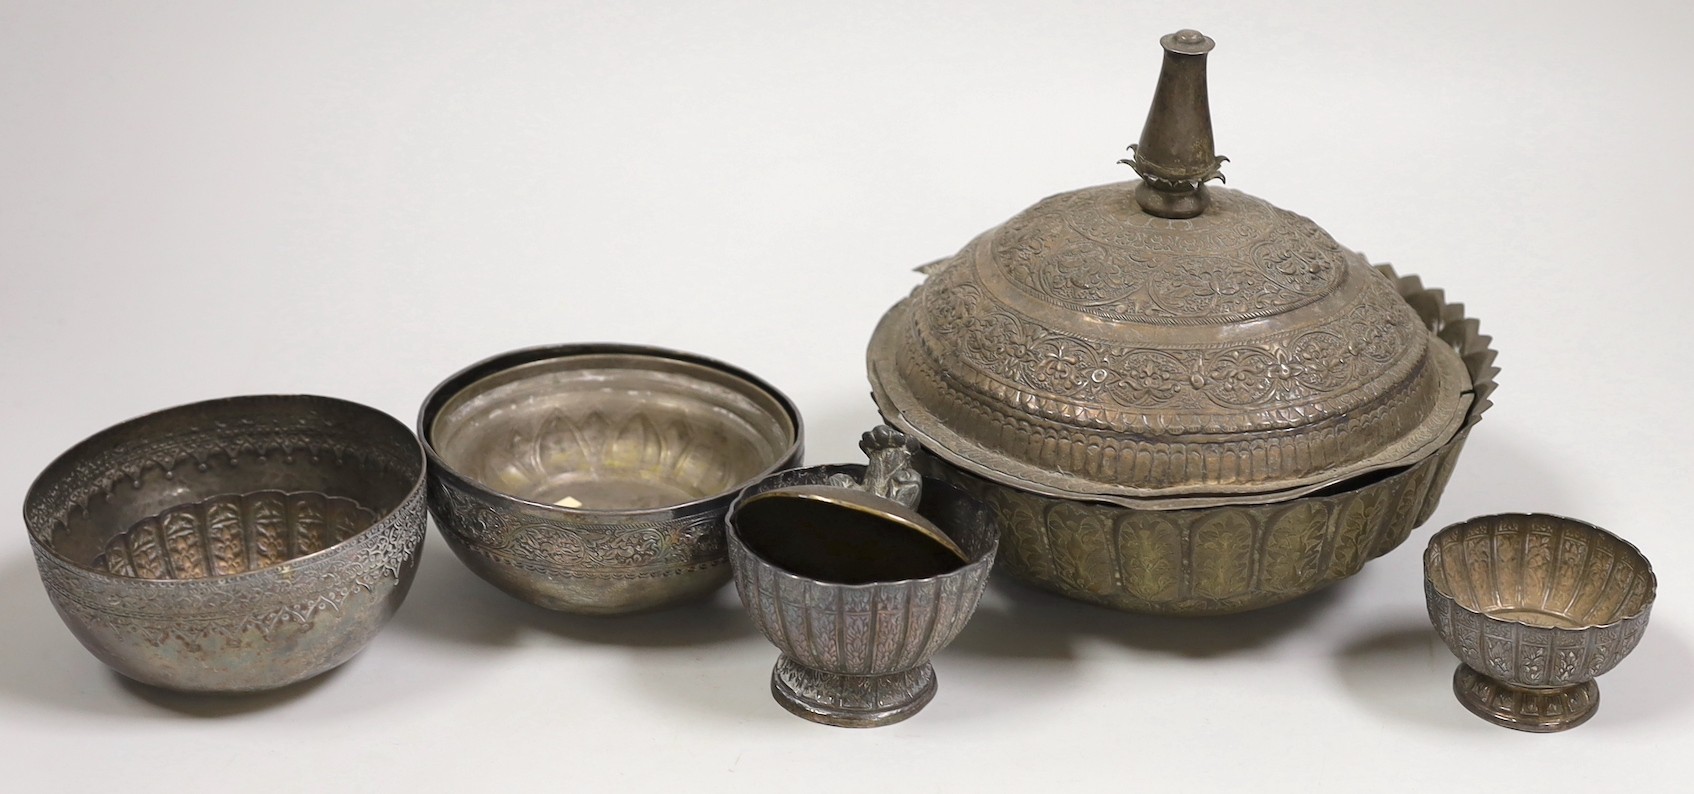 A Malay Straits pedestal bowl and cover or 'Batil Ber Tutop' (a.f.), three Malay Straits white metal betel nut cups and two similar small bowls, all with embossed floral or foliate designs (one cup with green enamelled d